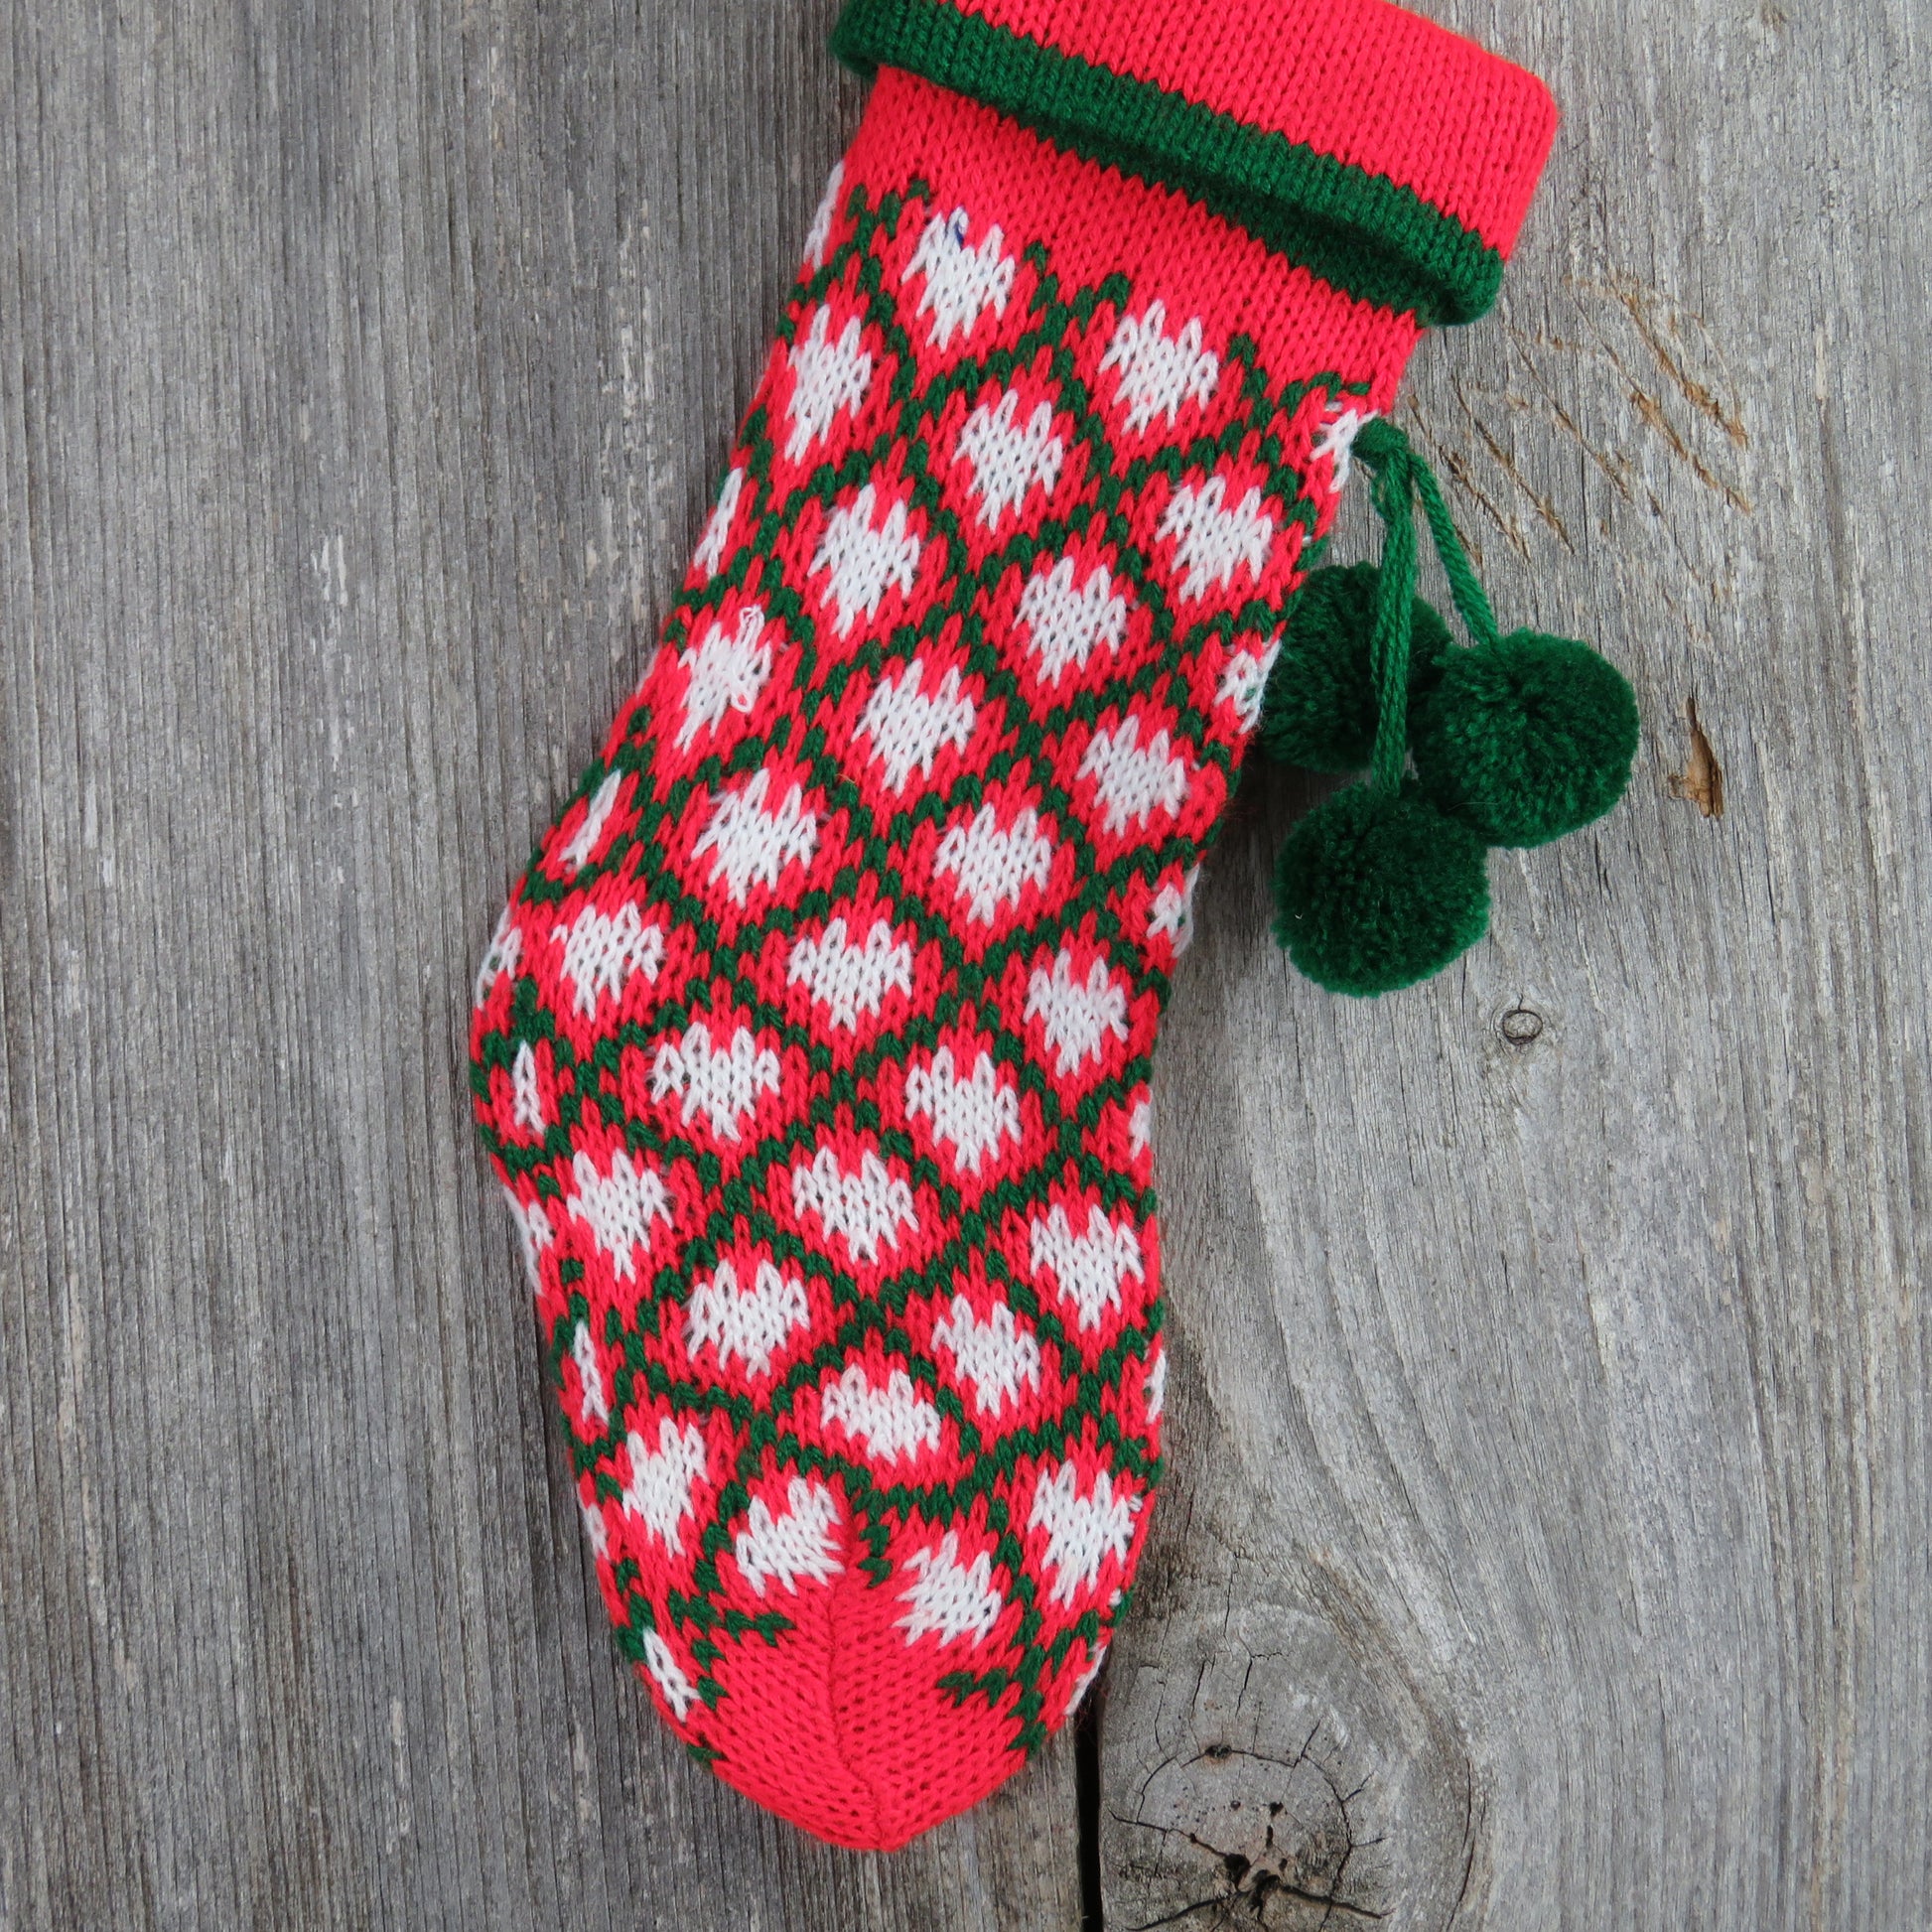 Vintage Mini Argyle Christmas Stocking Knitted Knit Red Green Pet Gift Bag - At Grandma's Table